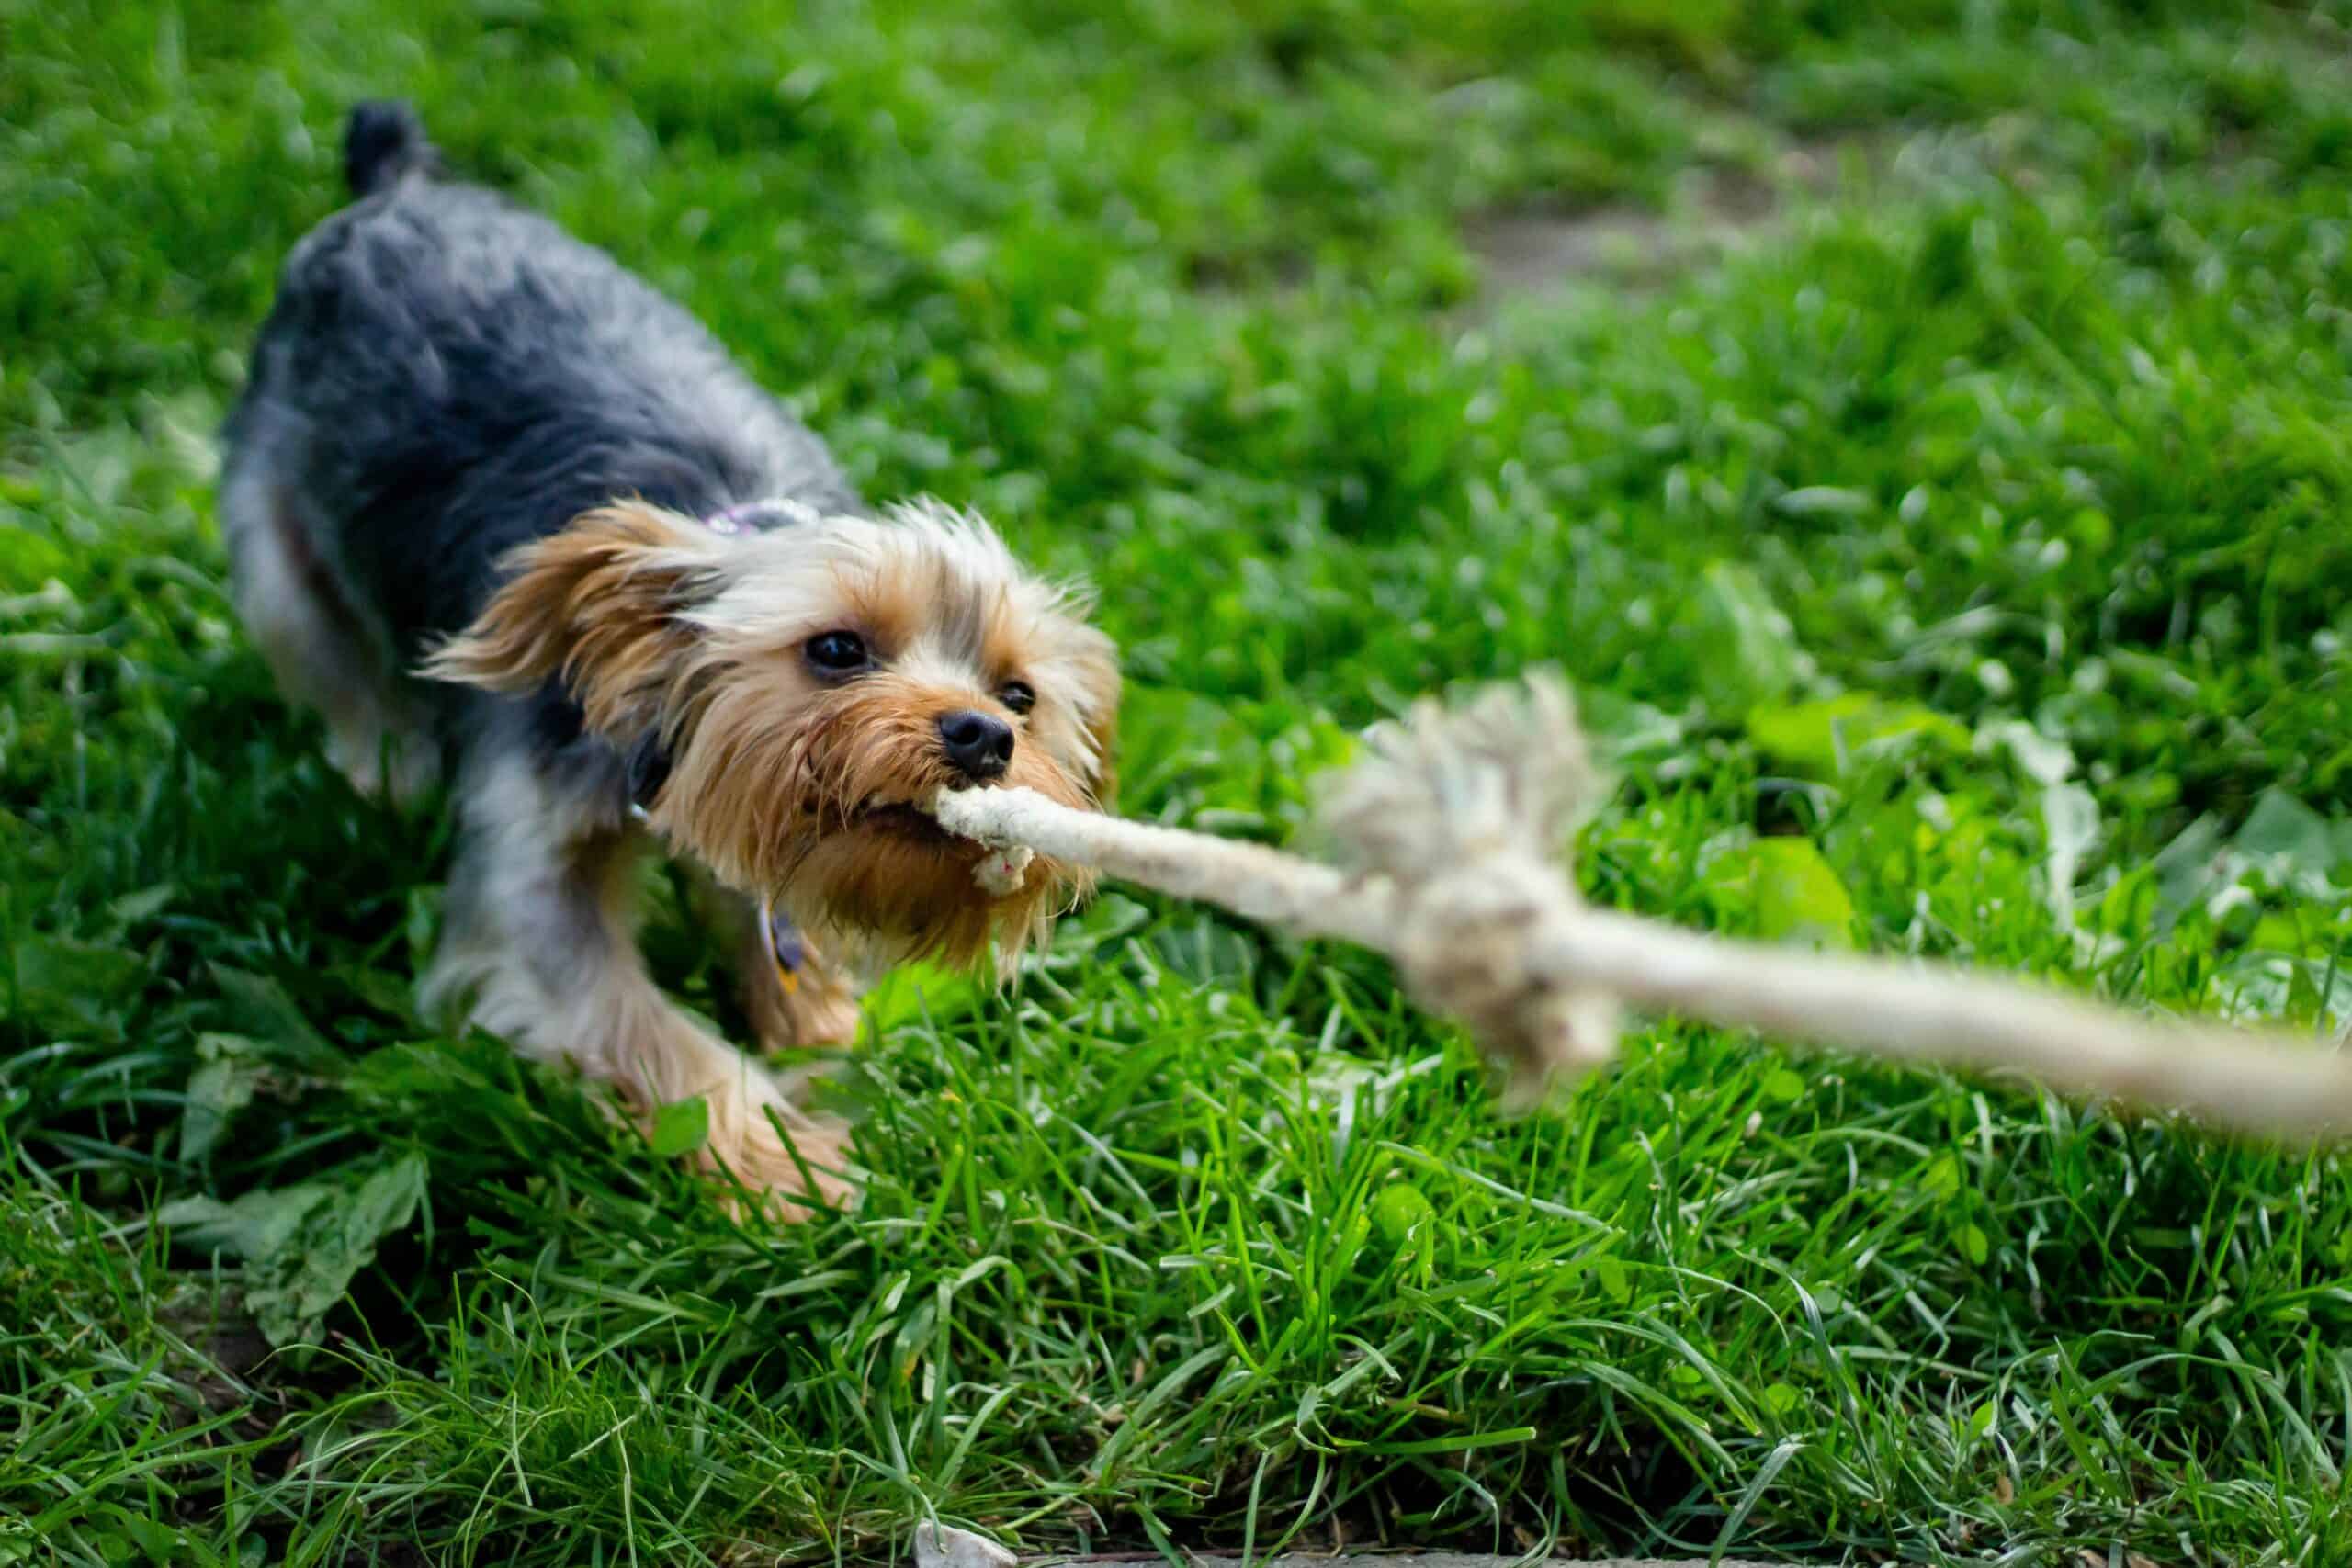 what triggers aggressiveness of border terrier